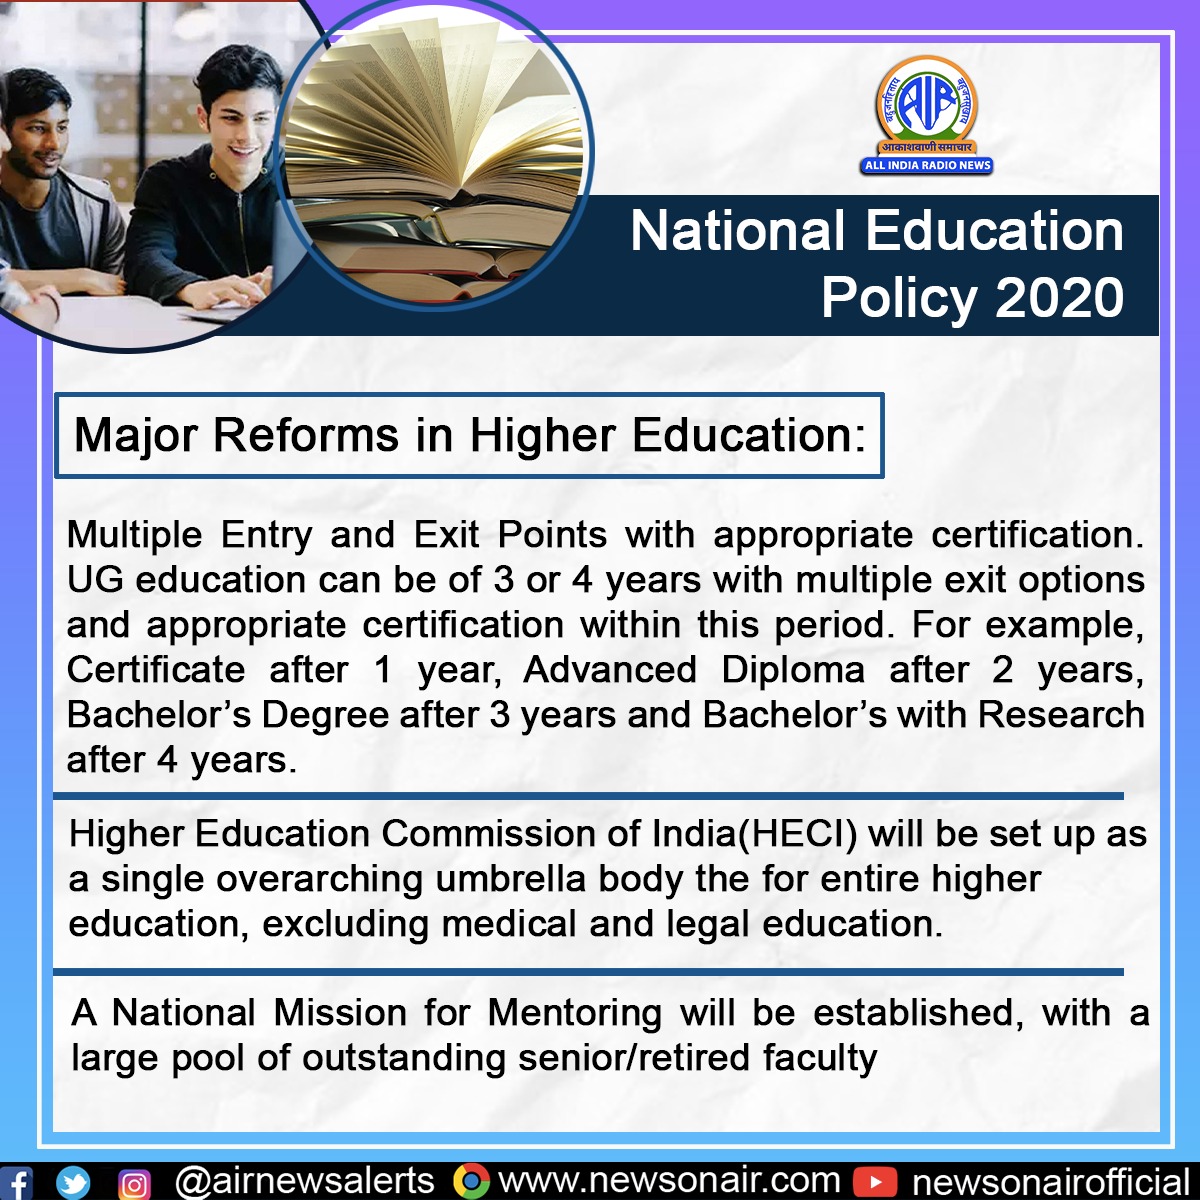 All India Radio News on Twitter: "⚡️ 'Highlights of National Education Policy 2020':… "